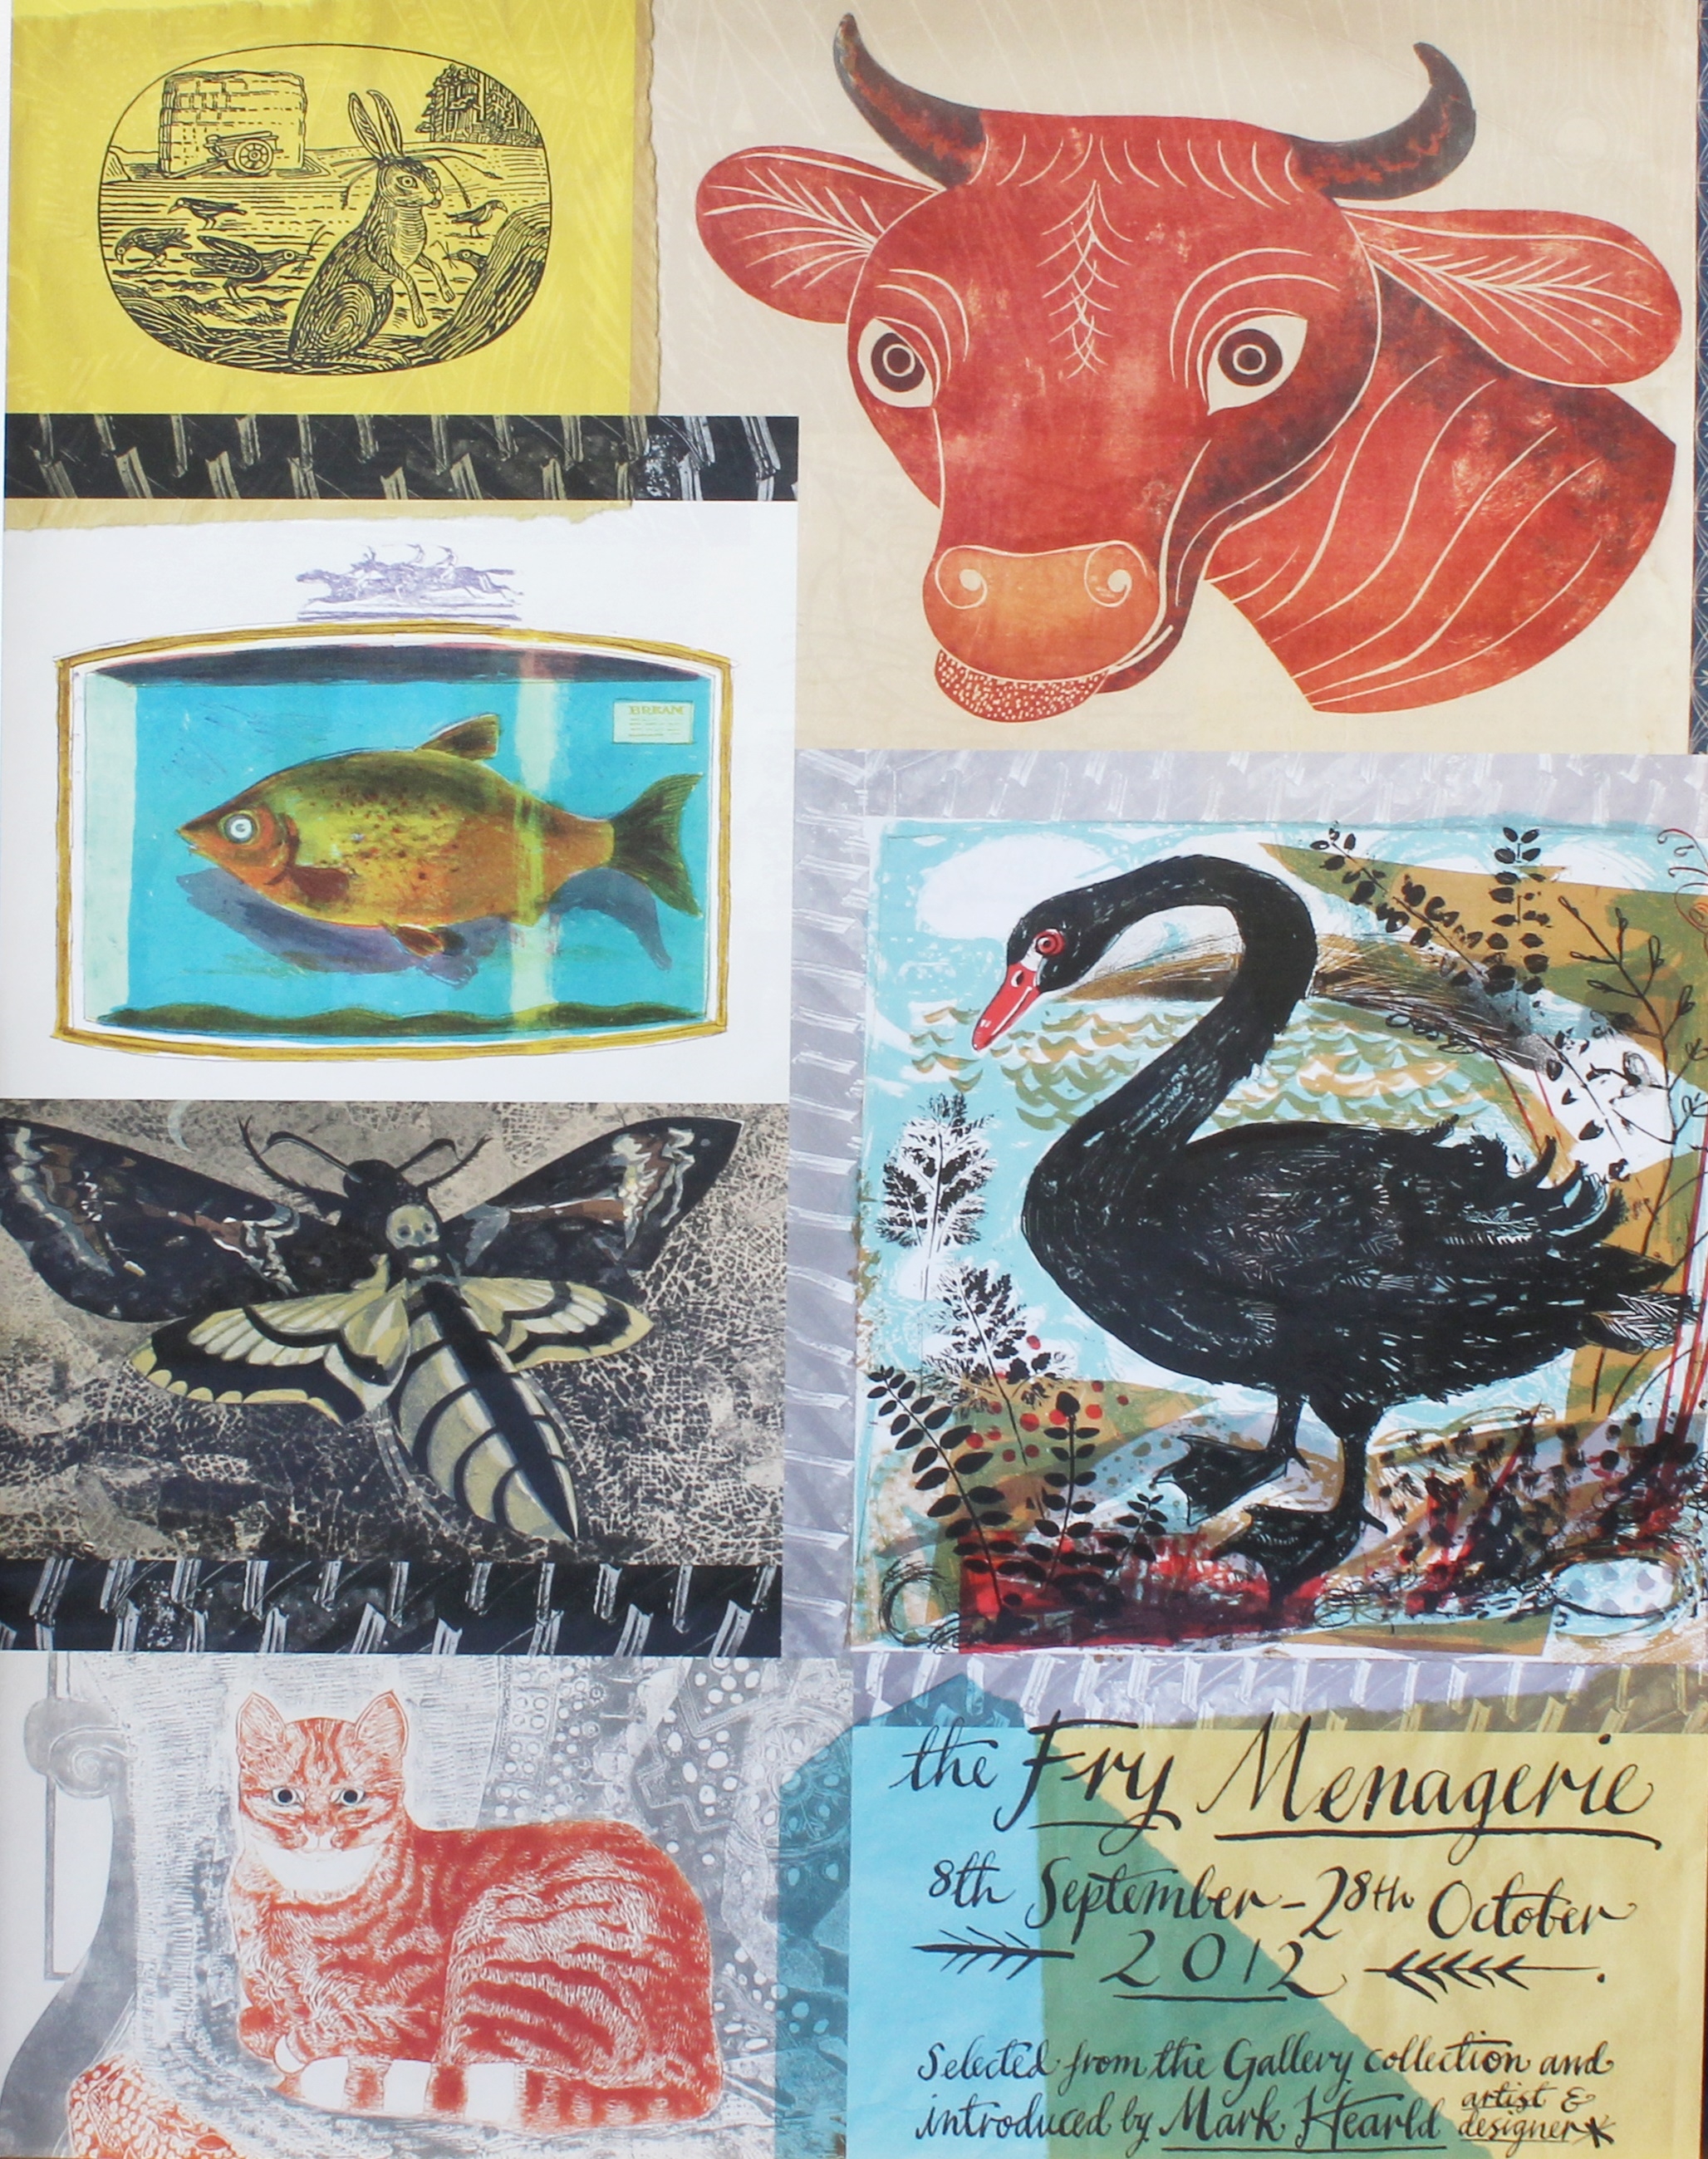 Poster for The Fry Menagerie 8th September - 28th October 2012 - Mark Hearld